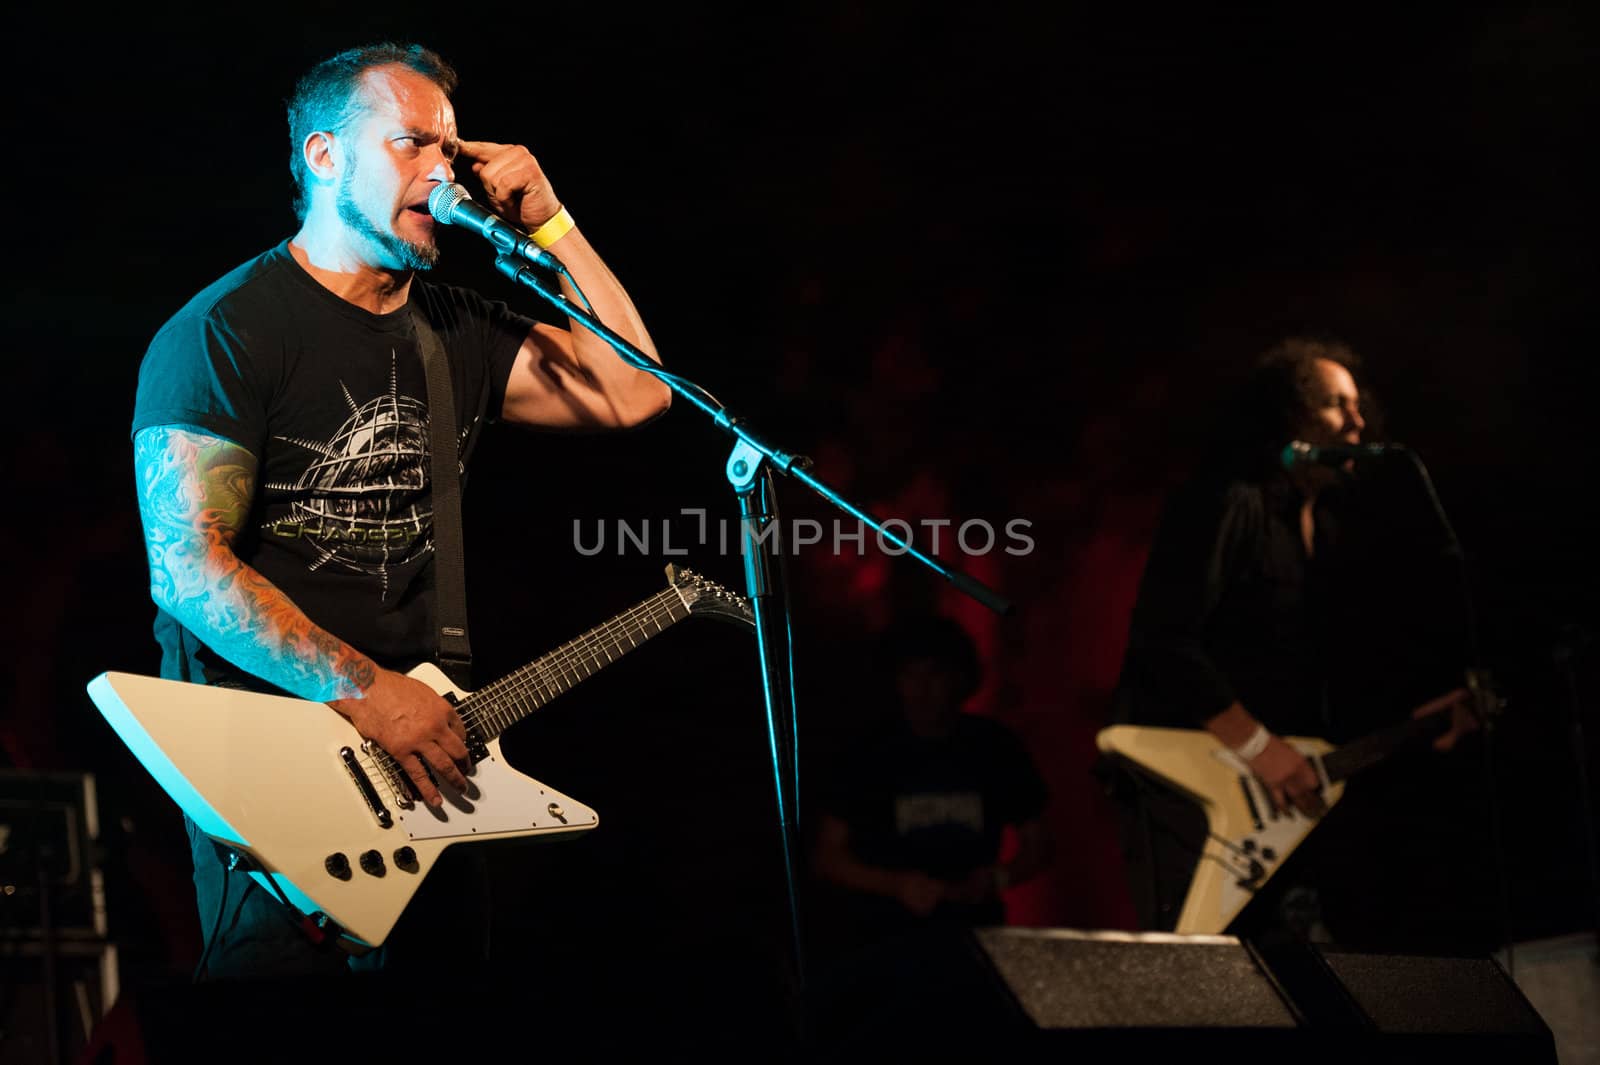 CANARY ISLANDS, SPAIN-JUNE 30: Brigido Duque(l) and Rafael Redin(r) from the band Koma, from Navarra in Spain, perform during Cebollinazo Rock in Galdar on June 30, 2012 in Canary Islands, Spain
